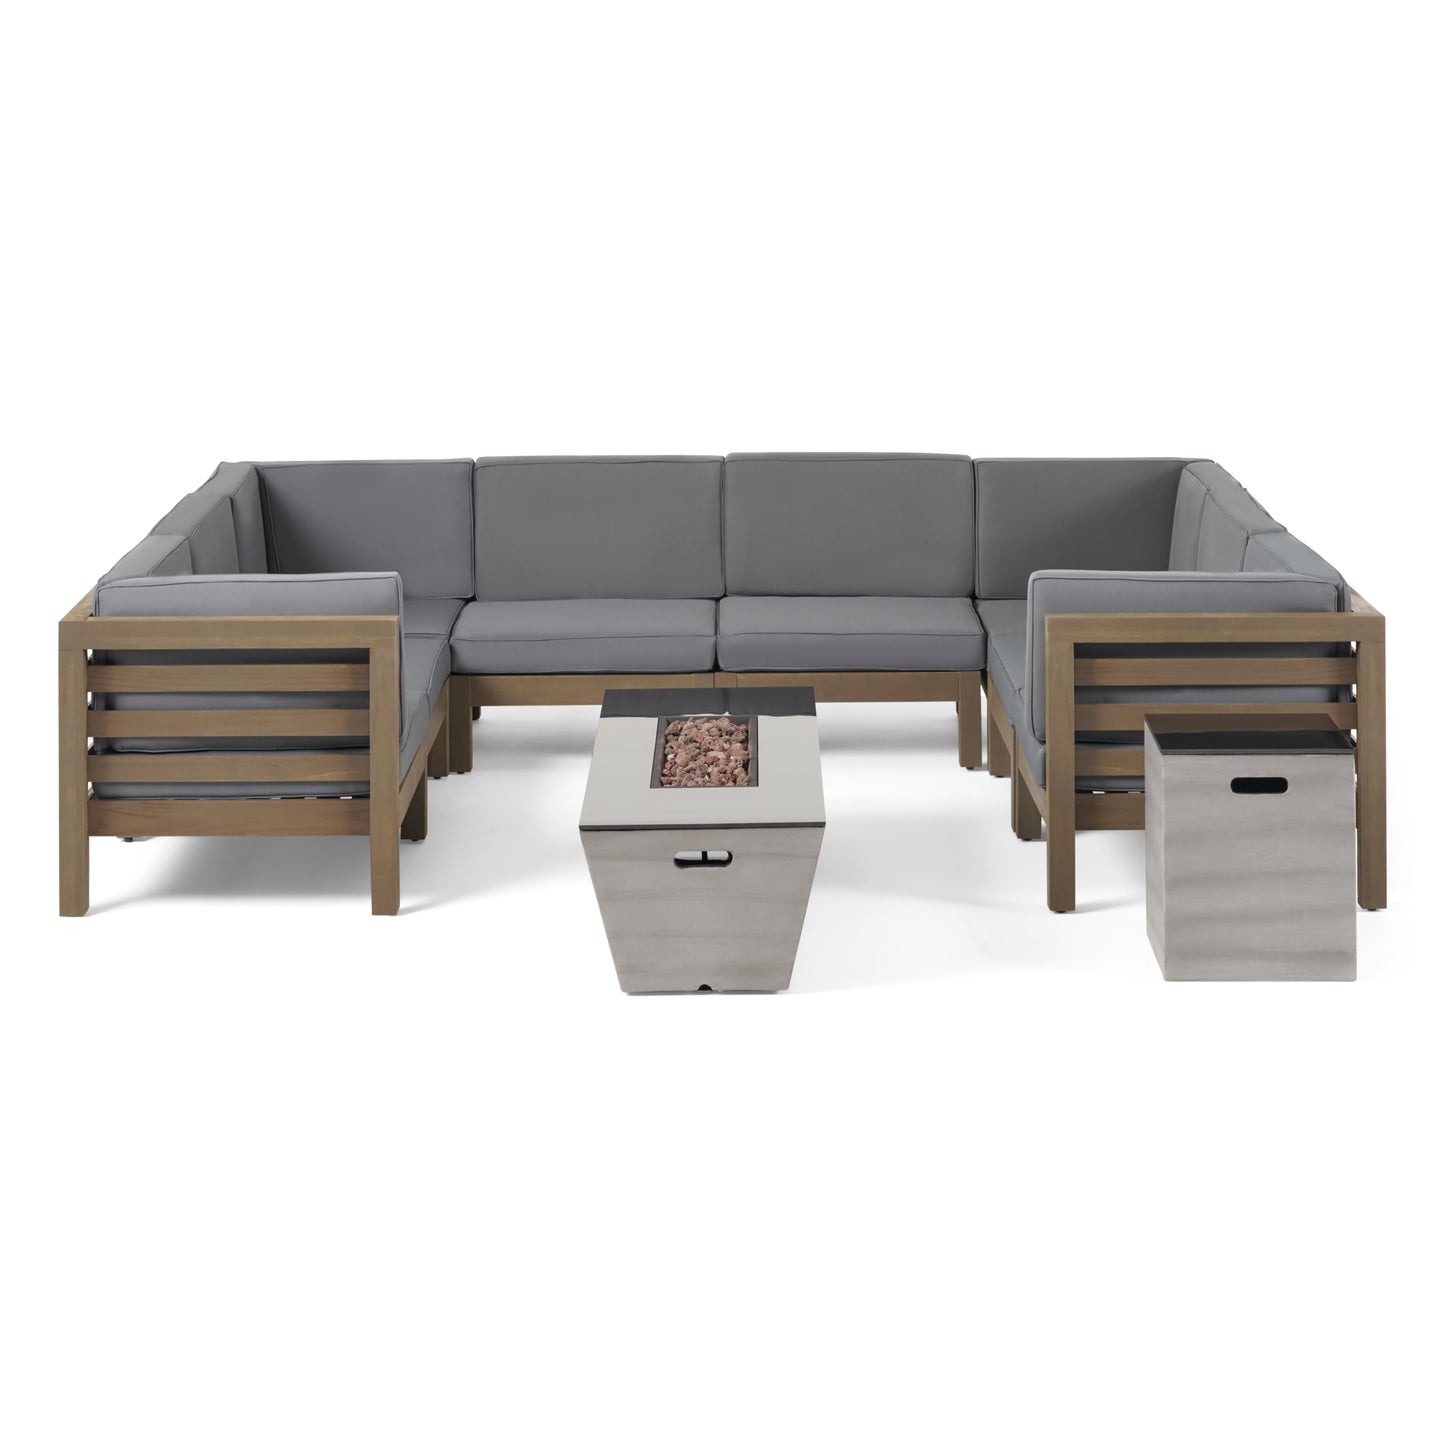 Kendry Outdoor Modern 8 Seater Acacia Wood Sectional Sofa Set with Fire Pit and Tank Holder